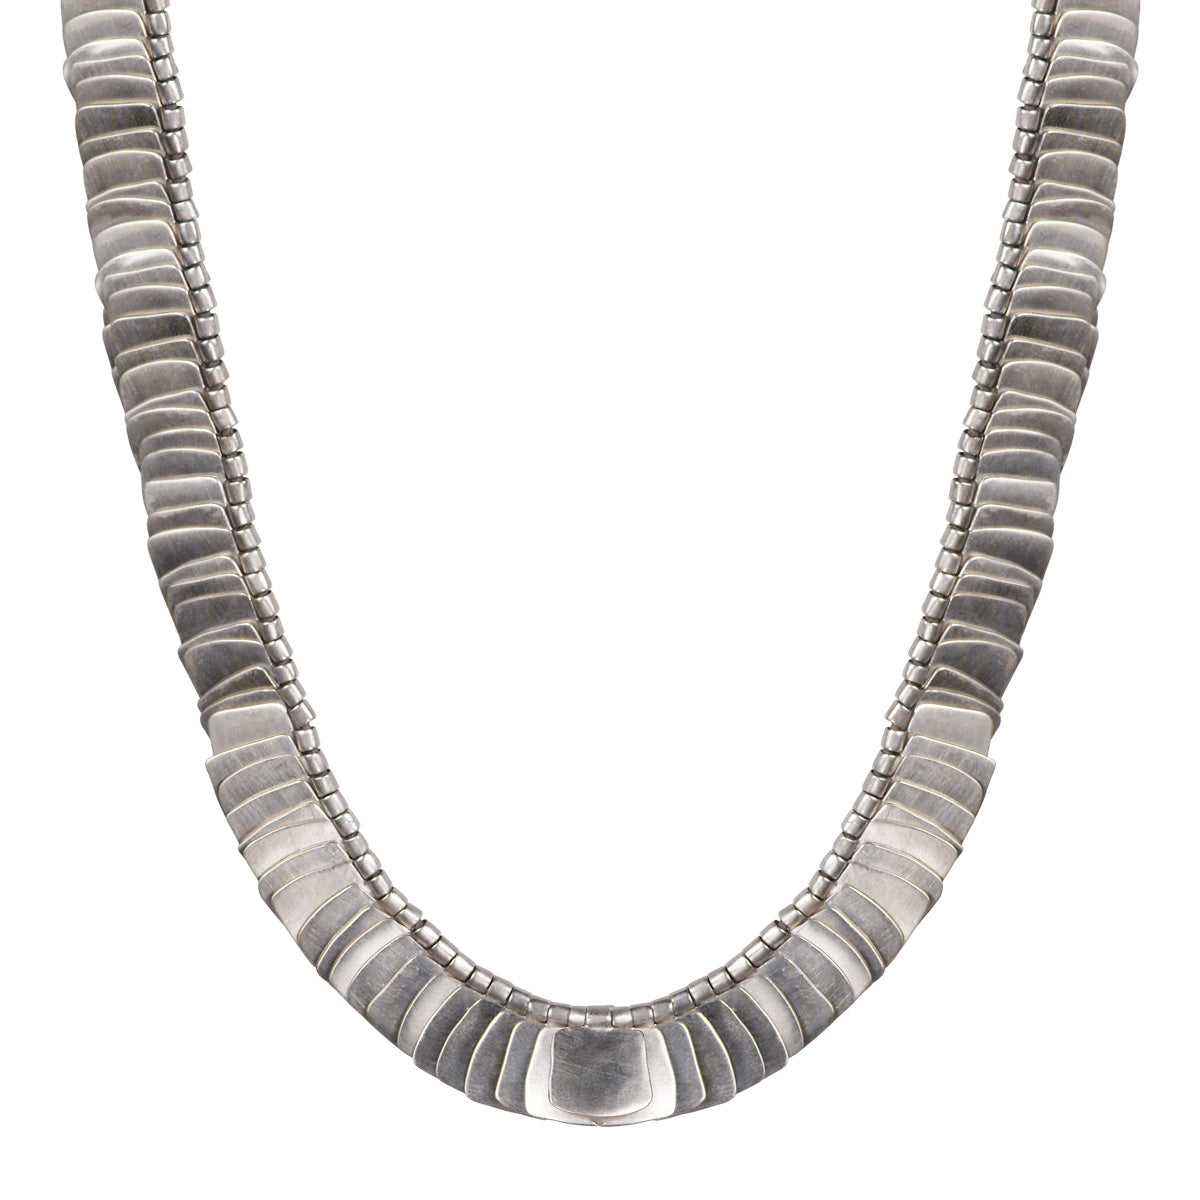 Sterling Silver Full Flattened Metal Necklace on Cord with Bead Closure